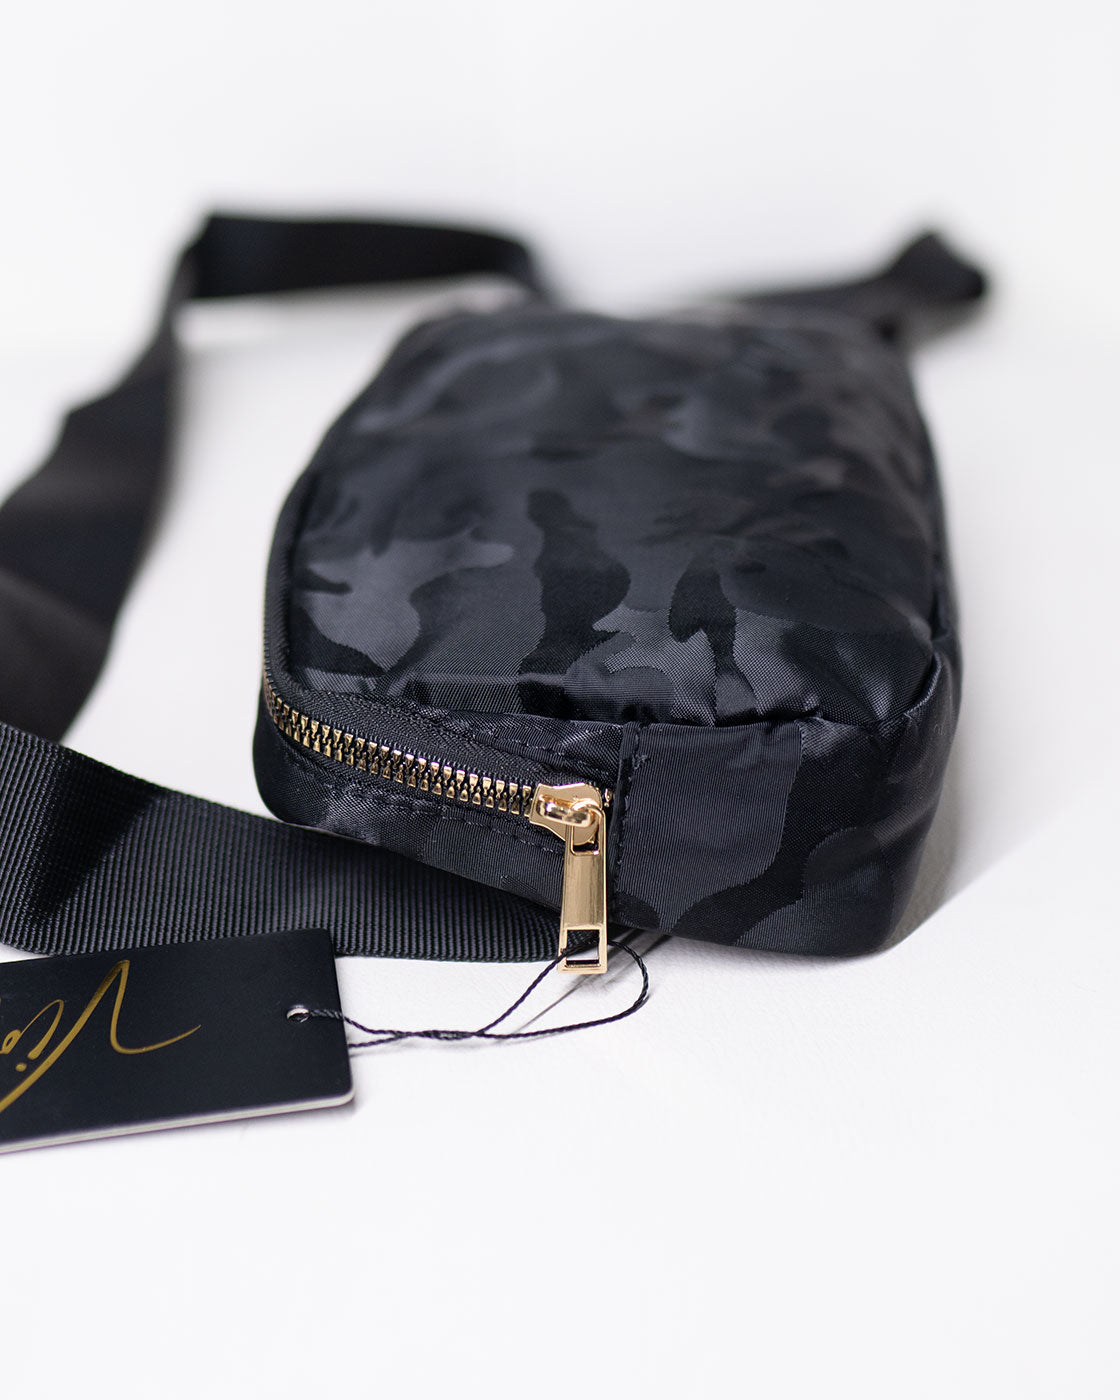 Embrace the Fanny: The Black Camo Fanny Pack from Violate the Dress Code